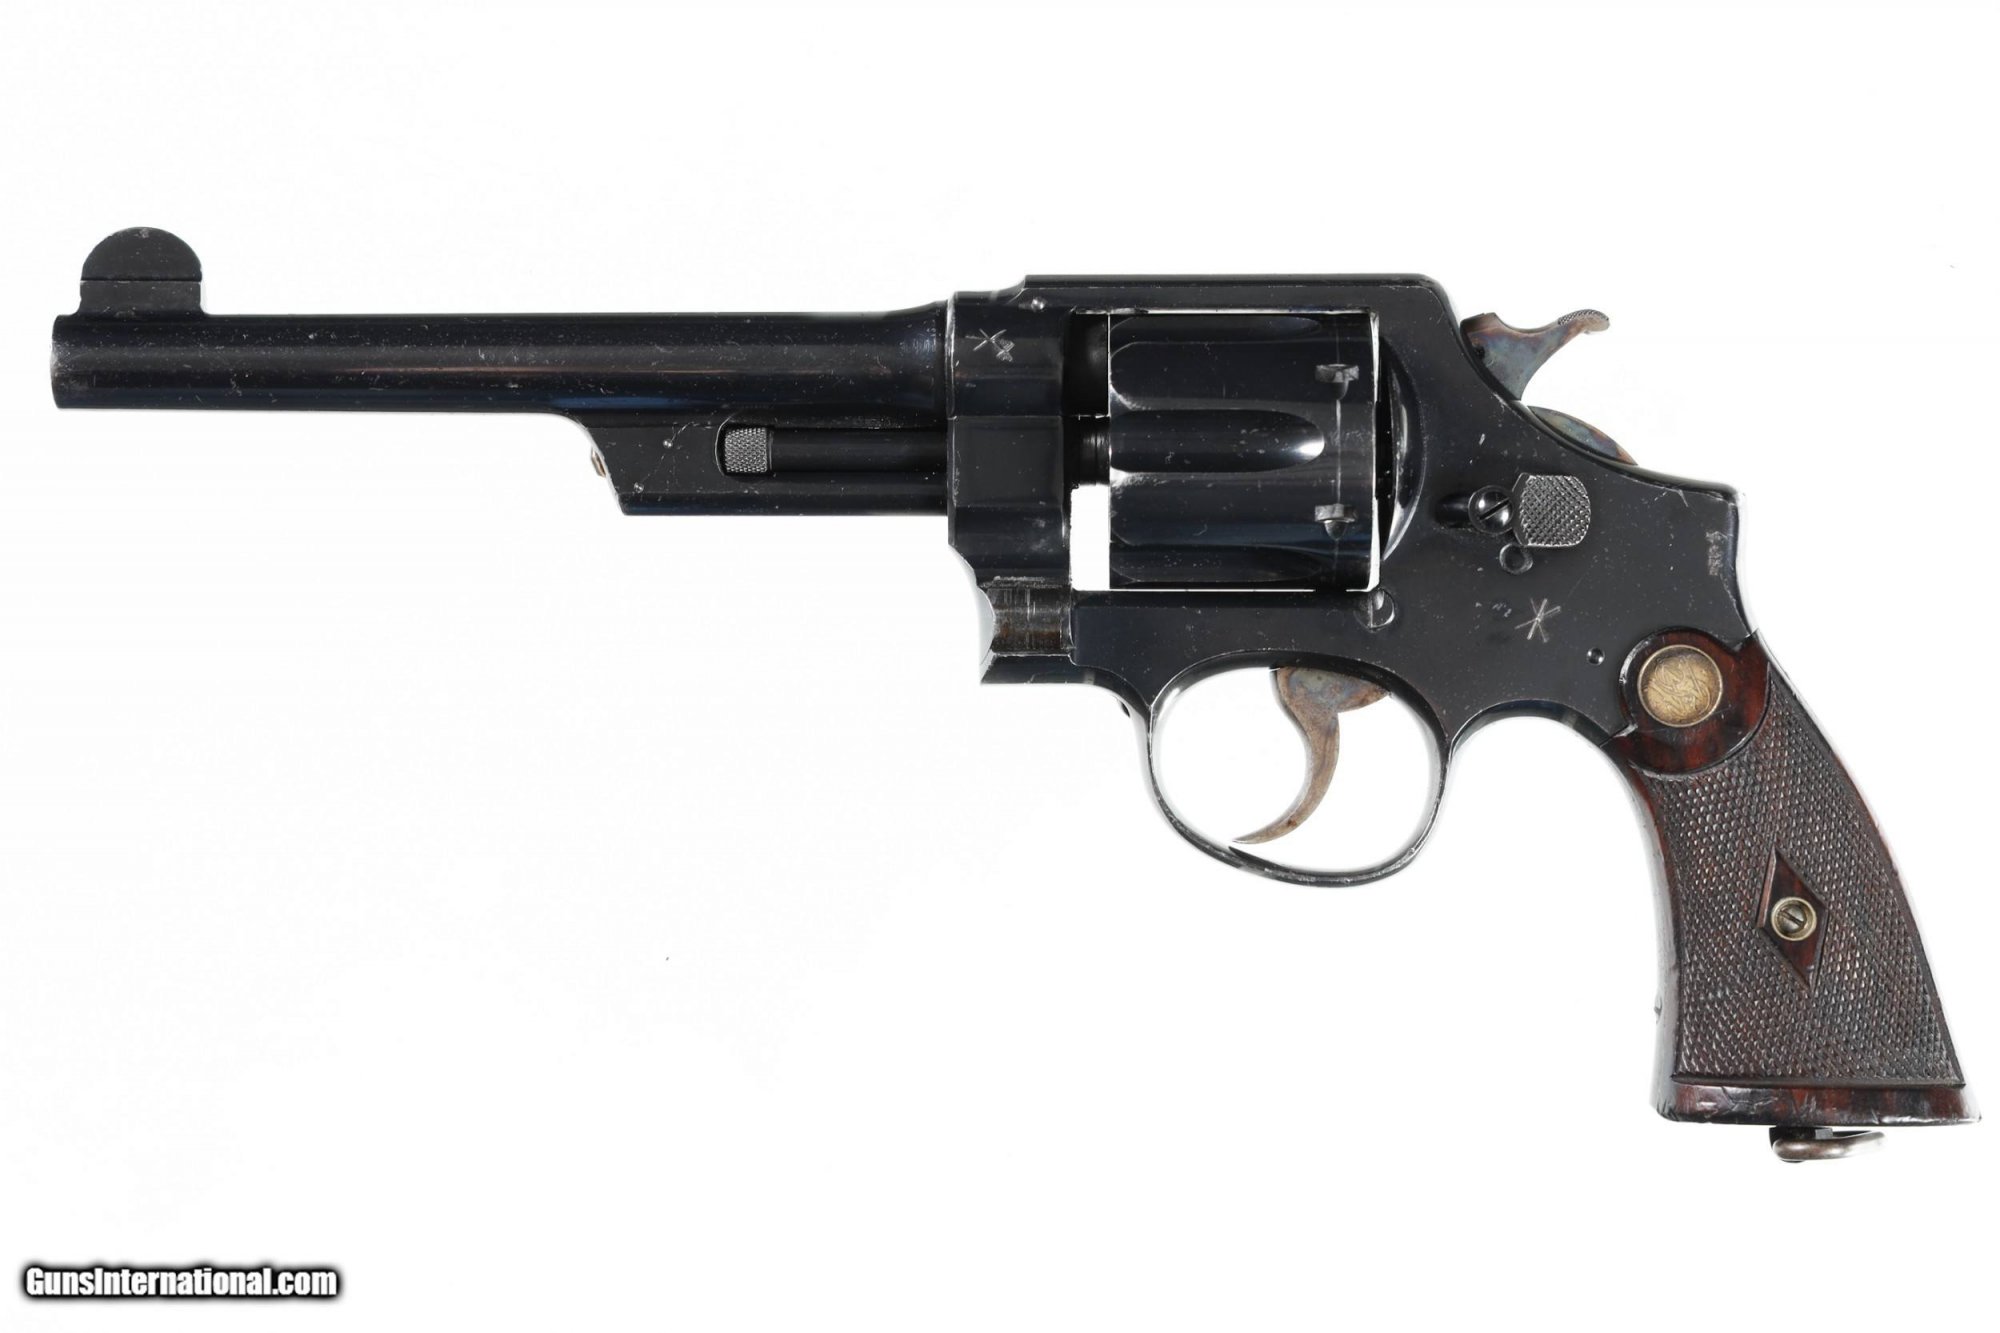 Smith-and-Wesson-455-Hand-Ejector-Revolver-45_101780732_111033_19DEAD7BADBB2889.jpg